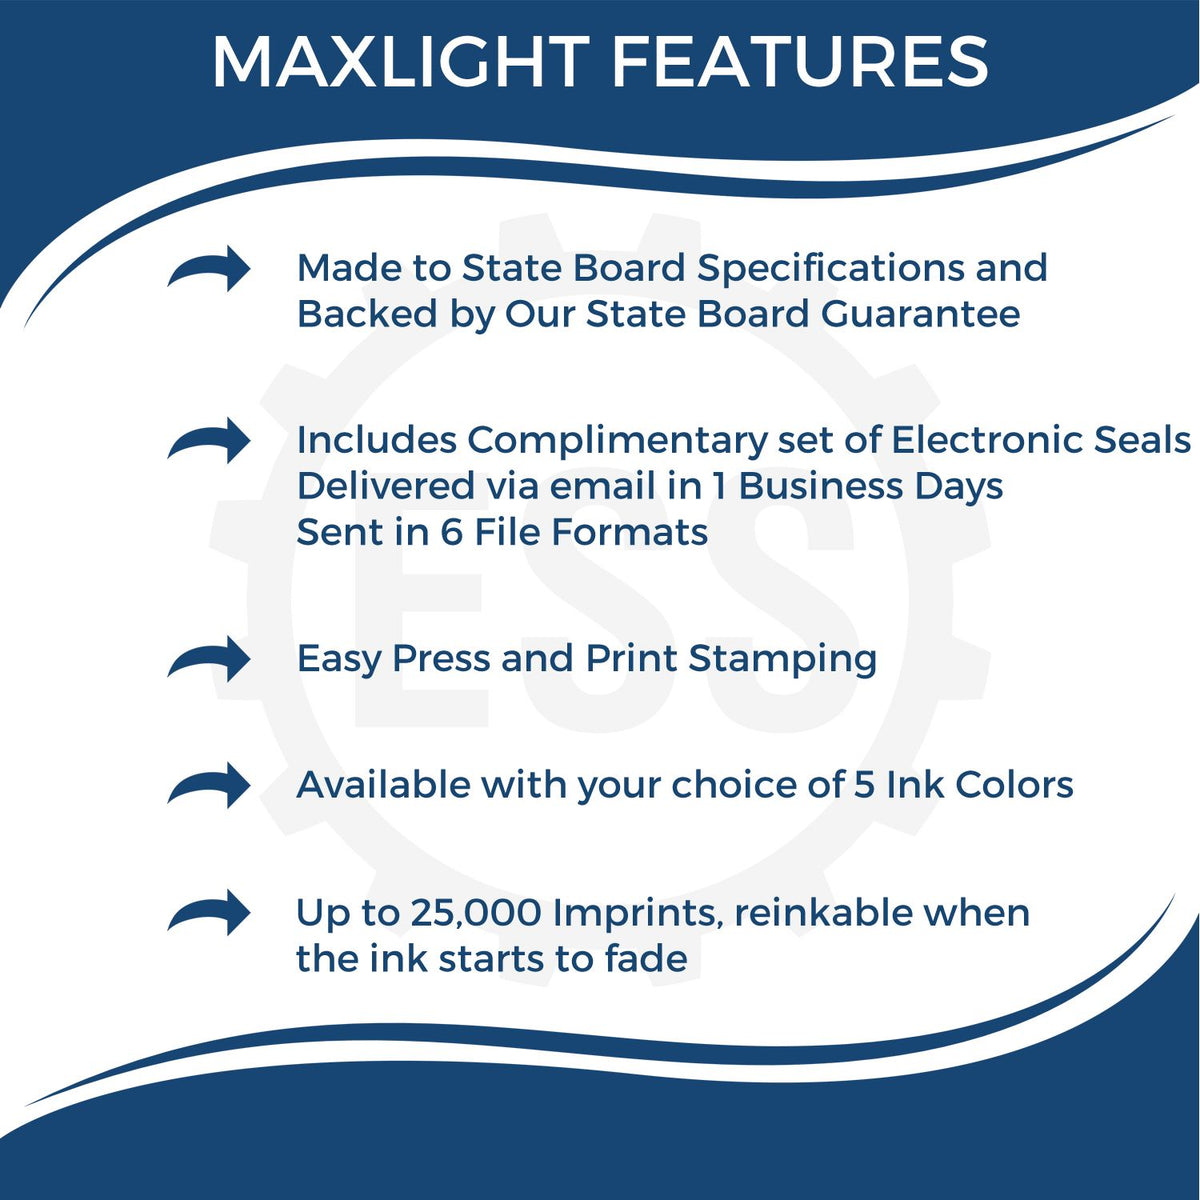 A picture of an infographic highlighting the selling points for the Premium MaxLight Pre-Inked Maryland Engineering Stamp